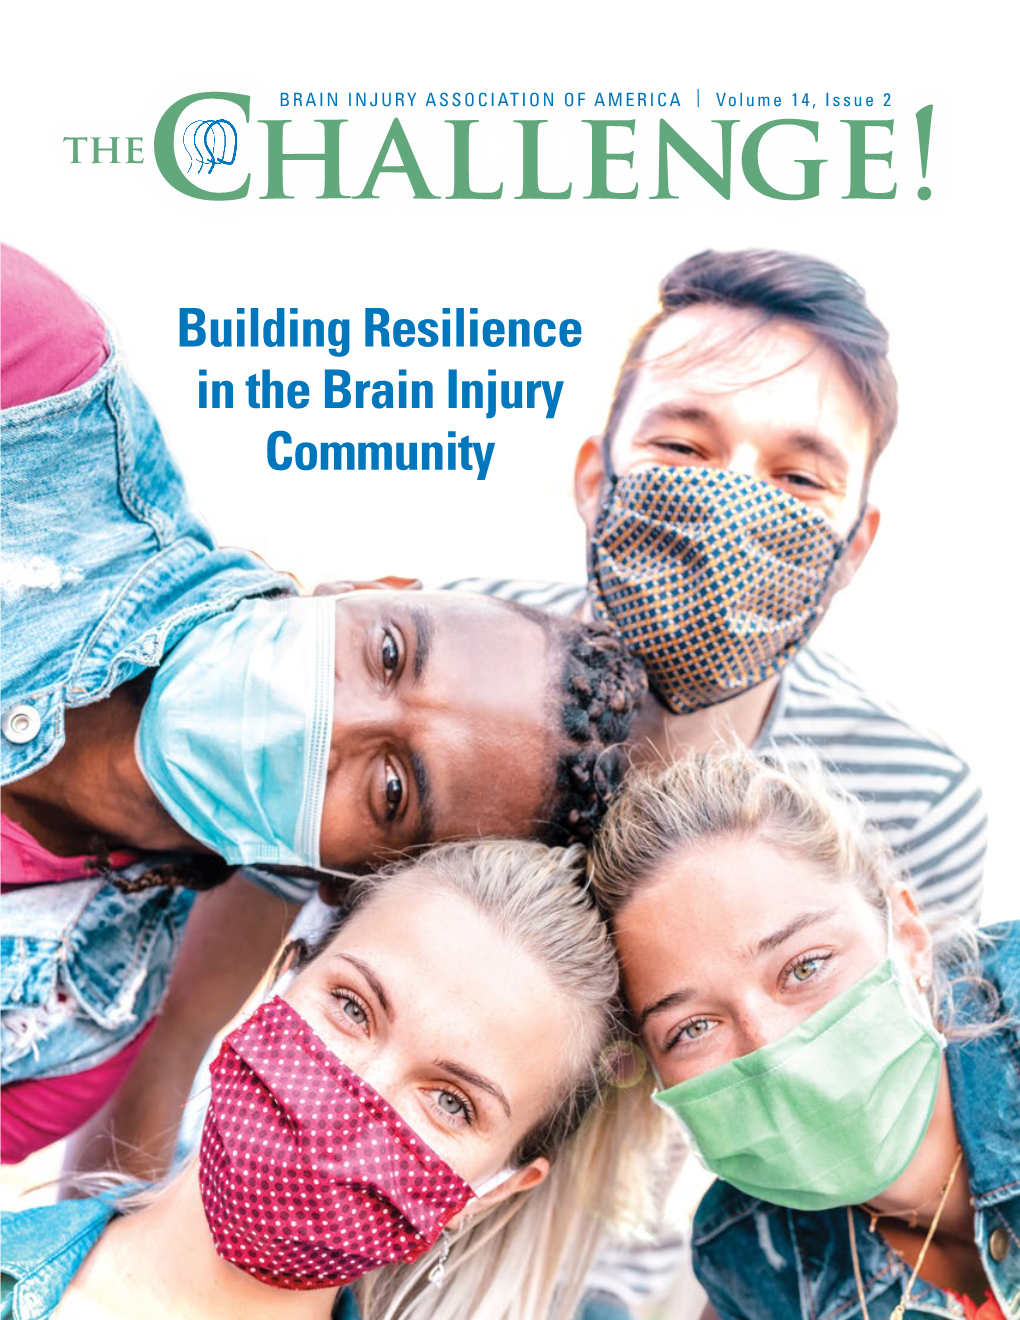 Building Resilience in the Brain Injury Community TABLE of CONTENTS